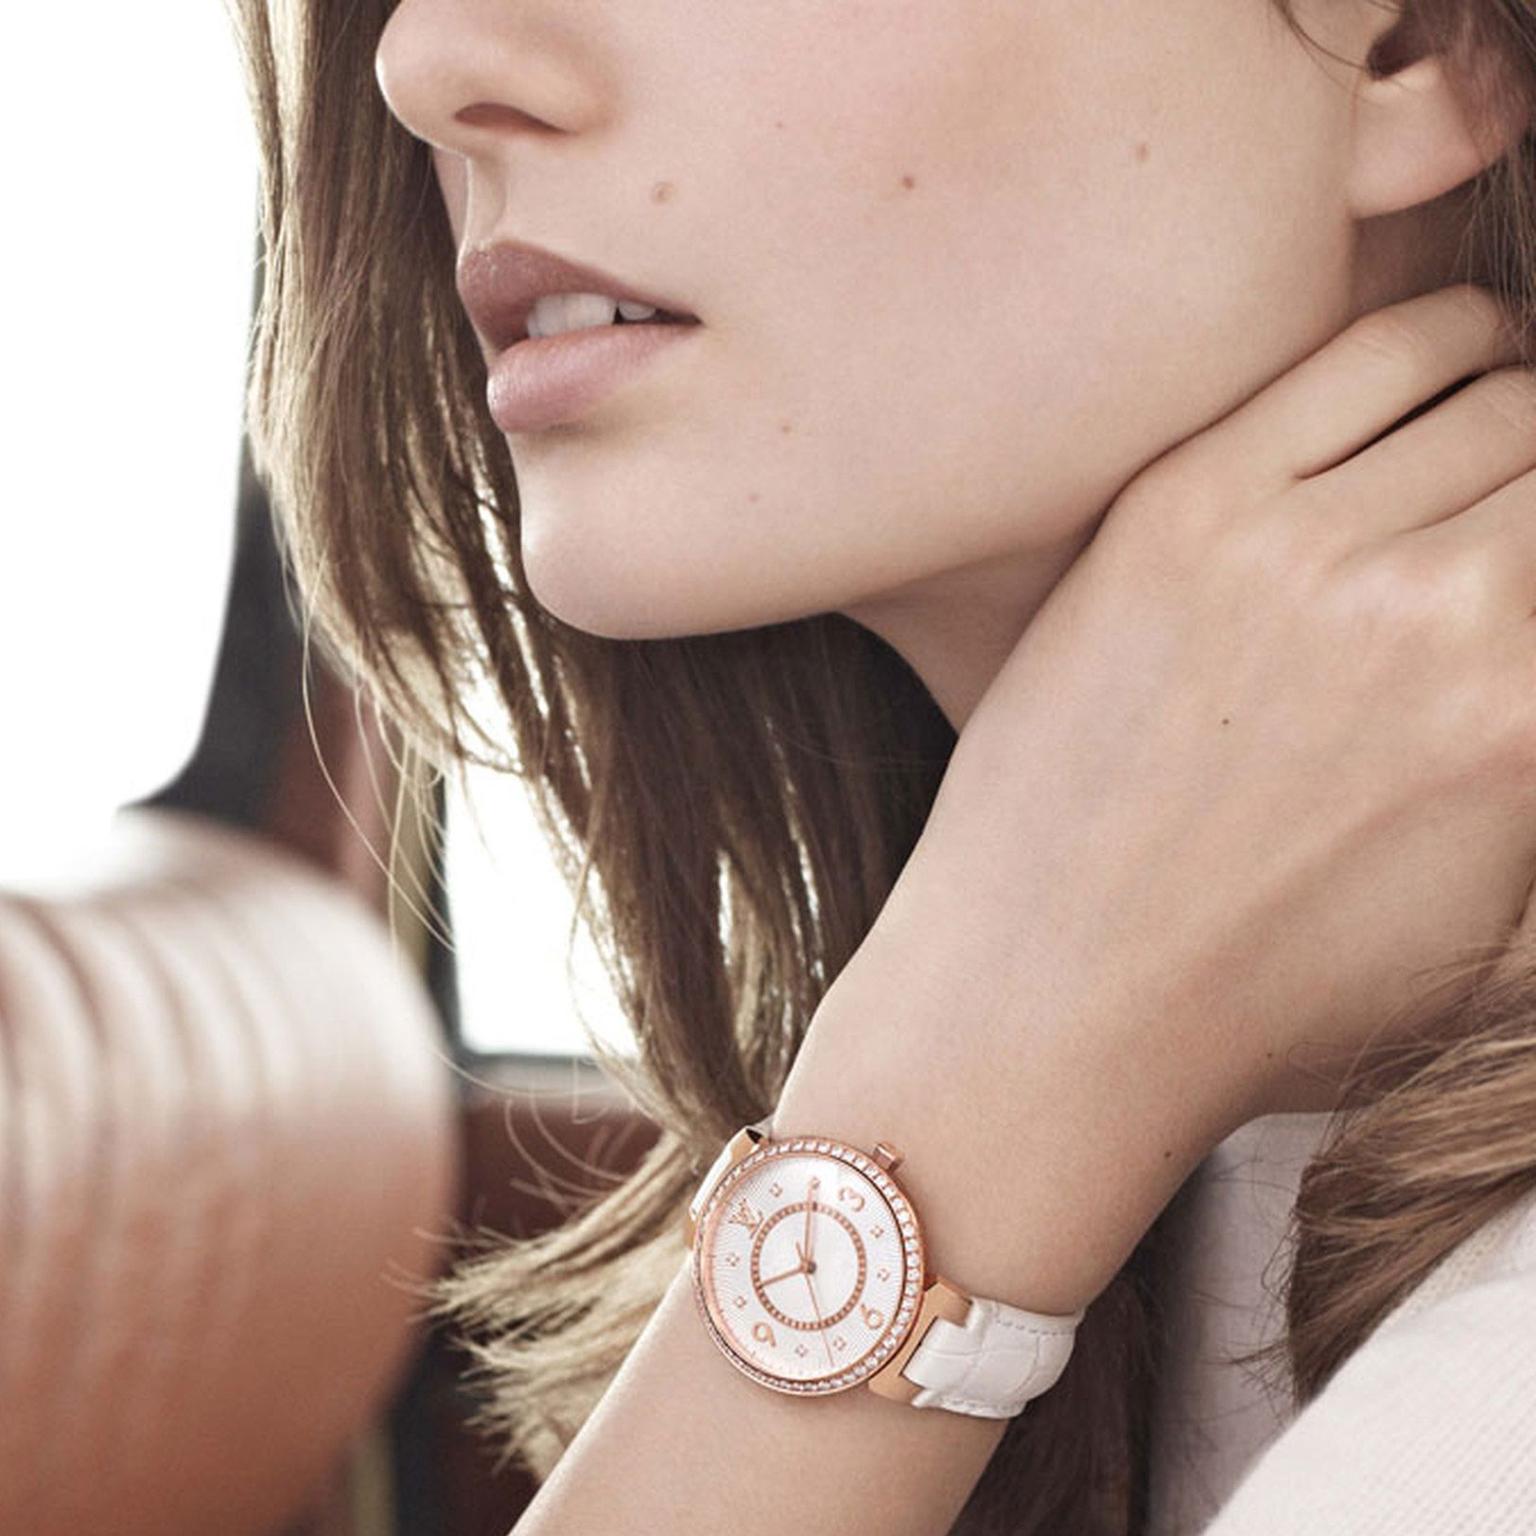 The new Tambour Monogram by Louis Vuitton is highly sophisticated and  pretty as a summer day